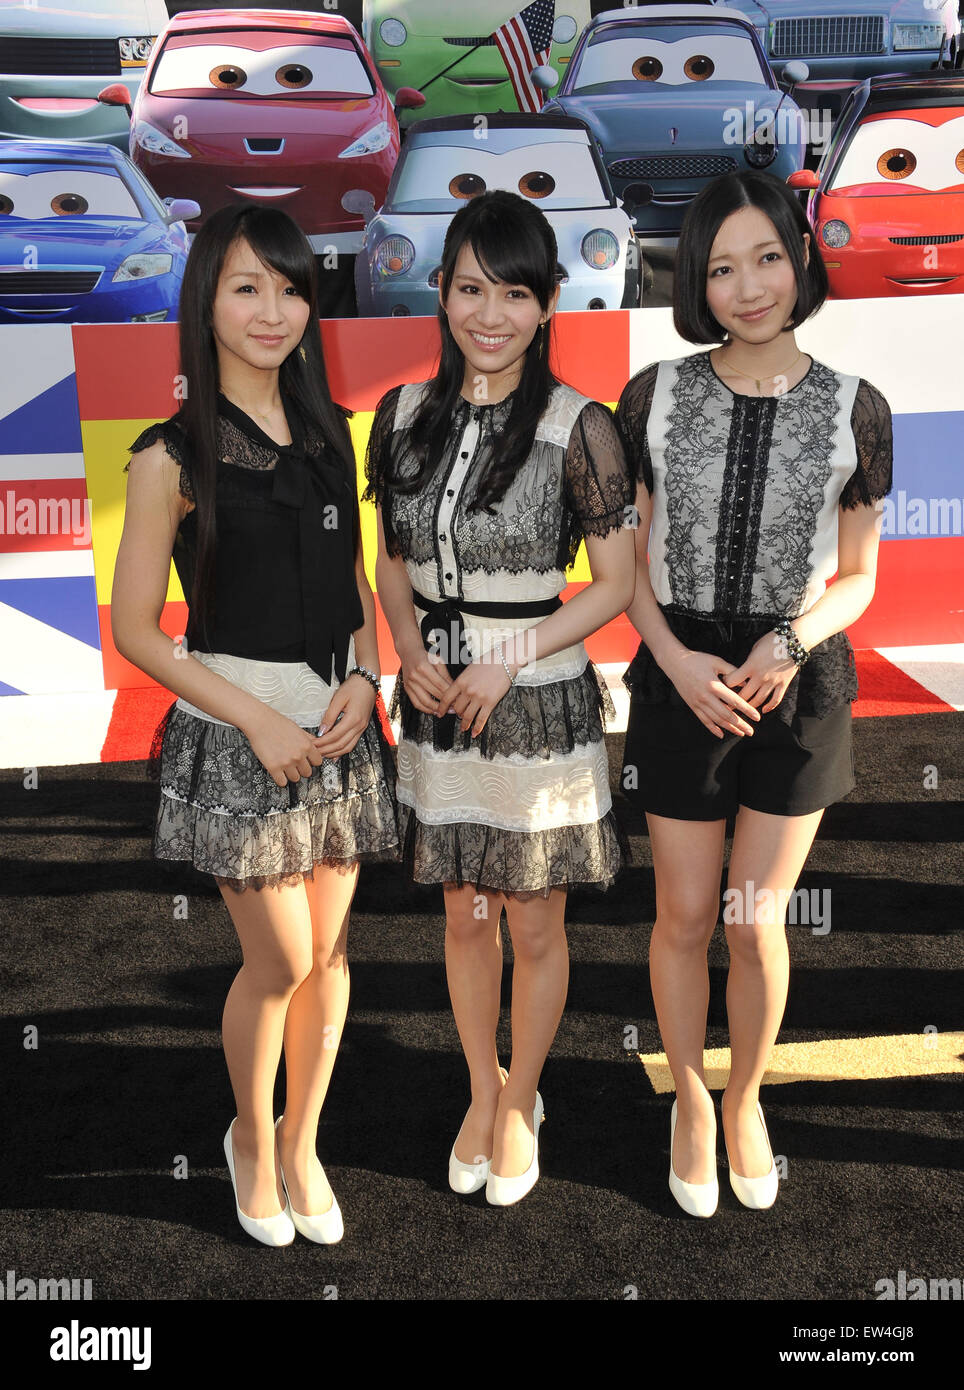 LOS ANGELES, CA - JUNE 18, 2011: Japanese pop group Perfume at the premiere  of "Cars 2" at the El Capitan Theatre, Hollywood Stock Photo - Alamy